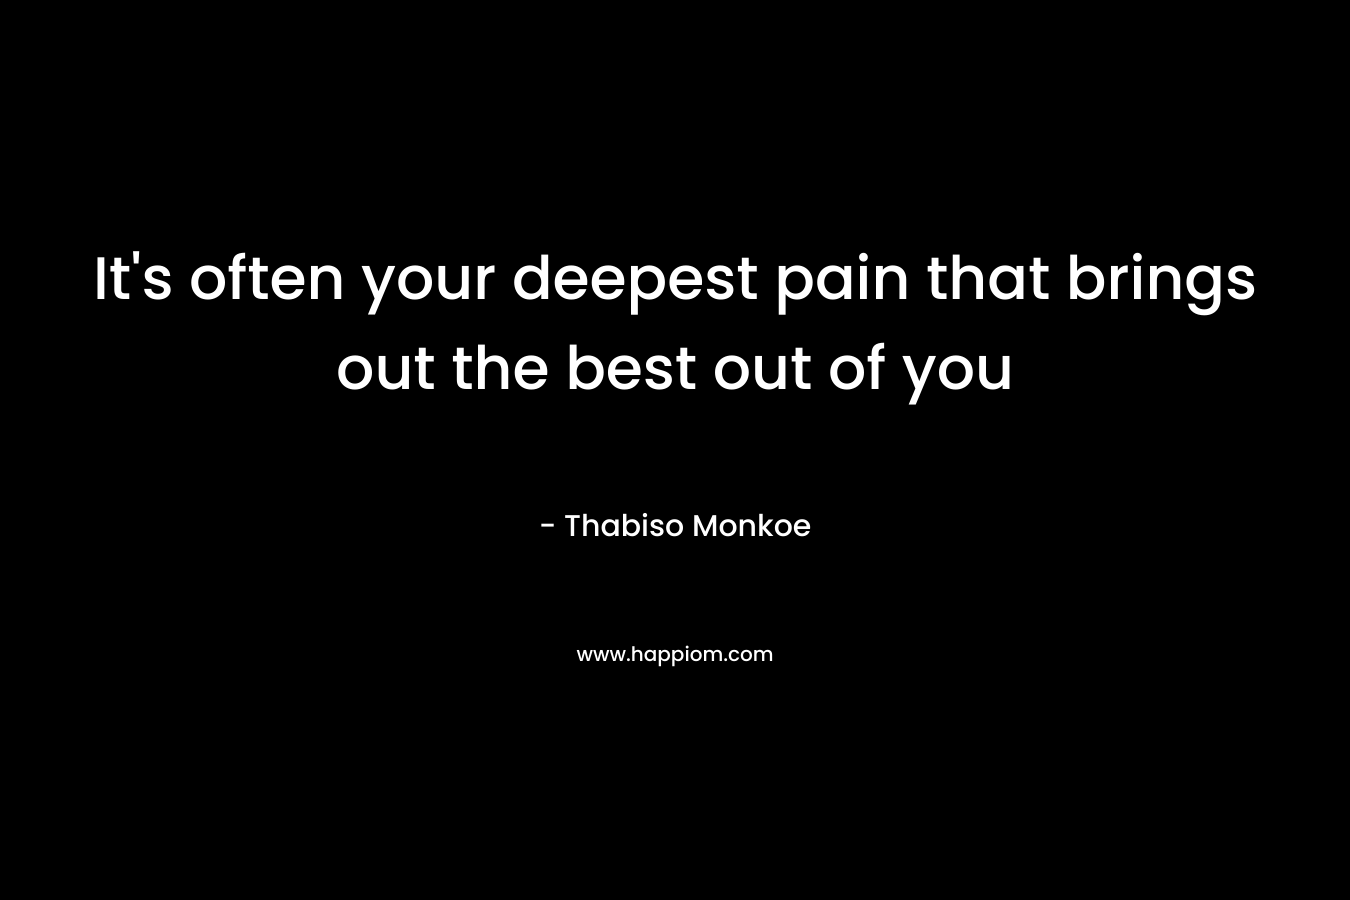 It's often your deepest pain that brings out the best out of you